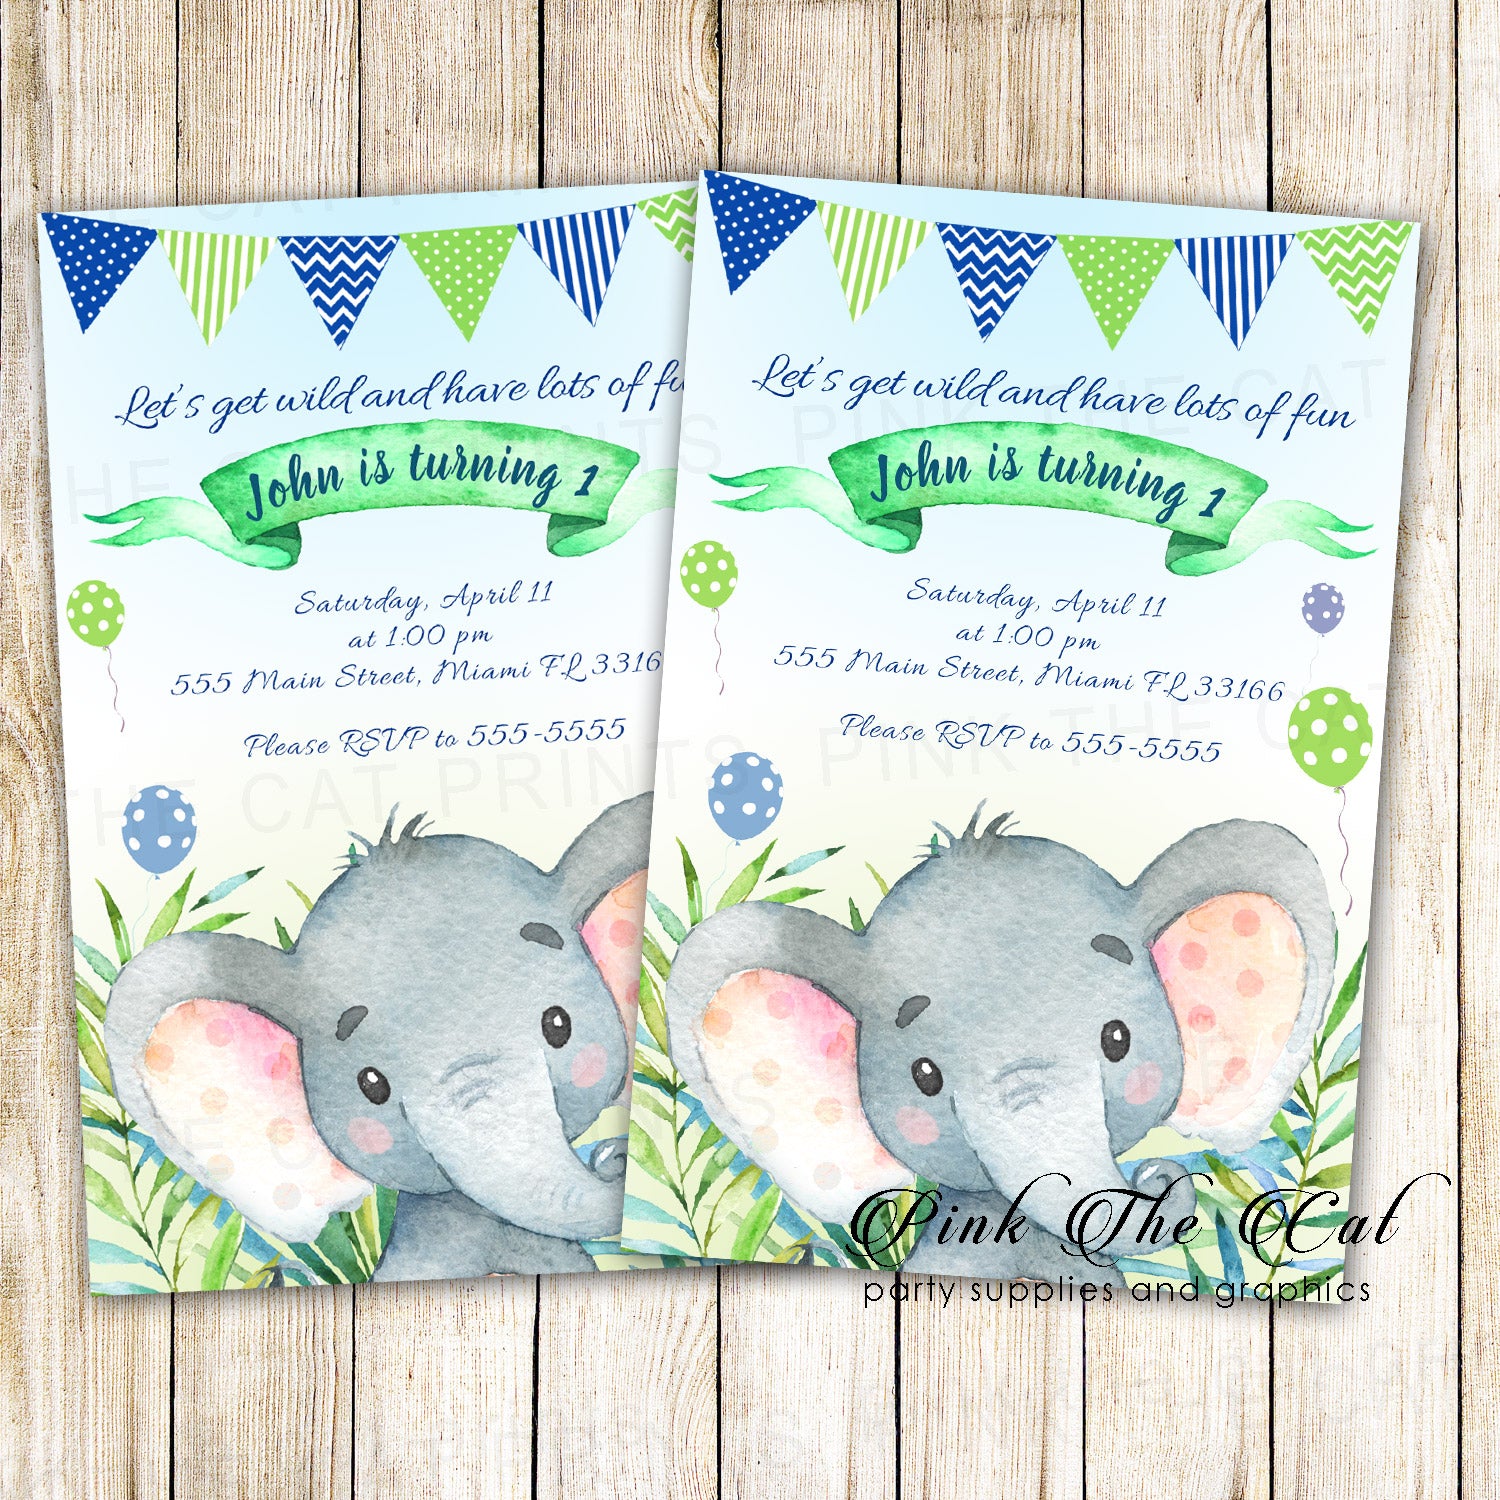 Elephant invitations watercolor painted boy birthday party printable